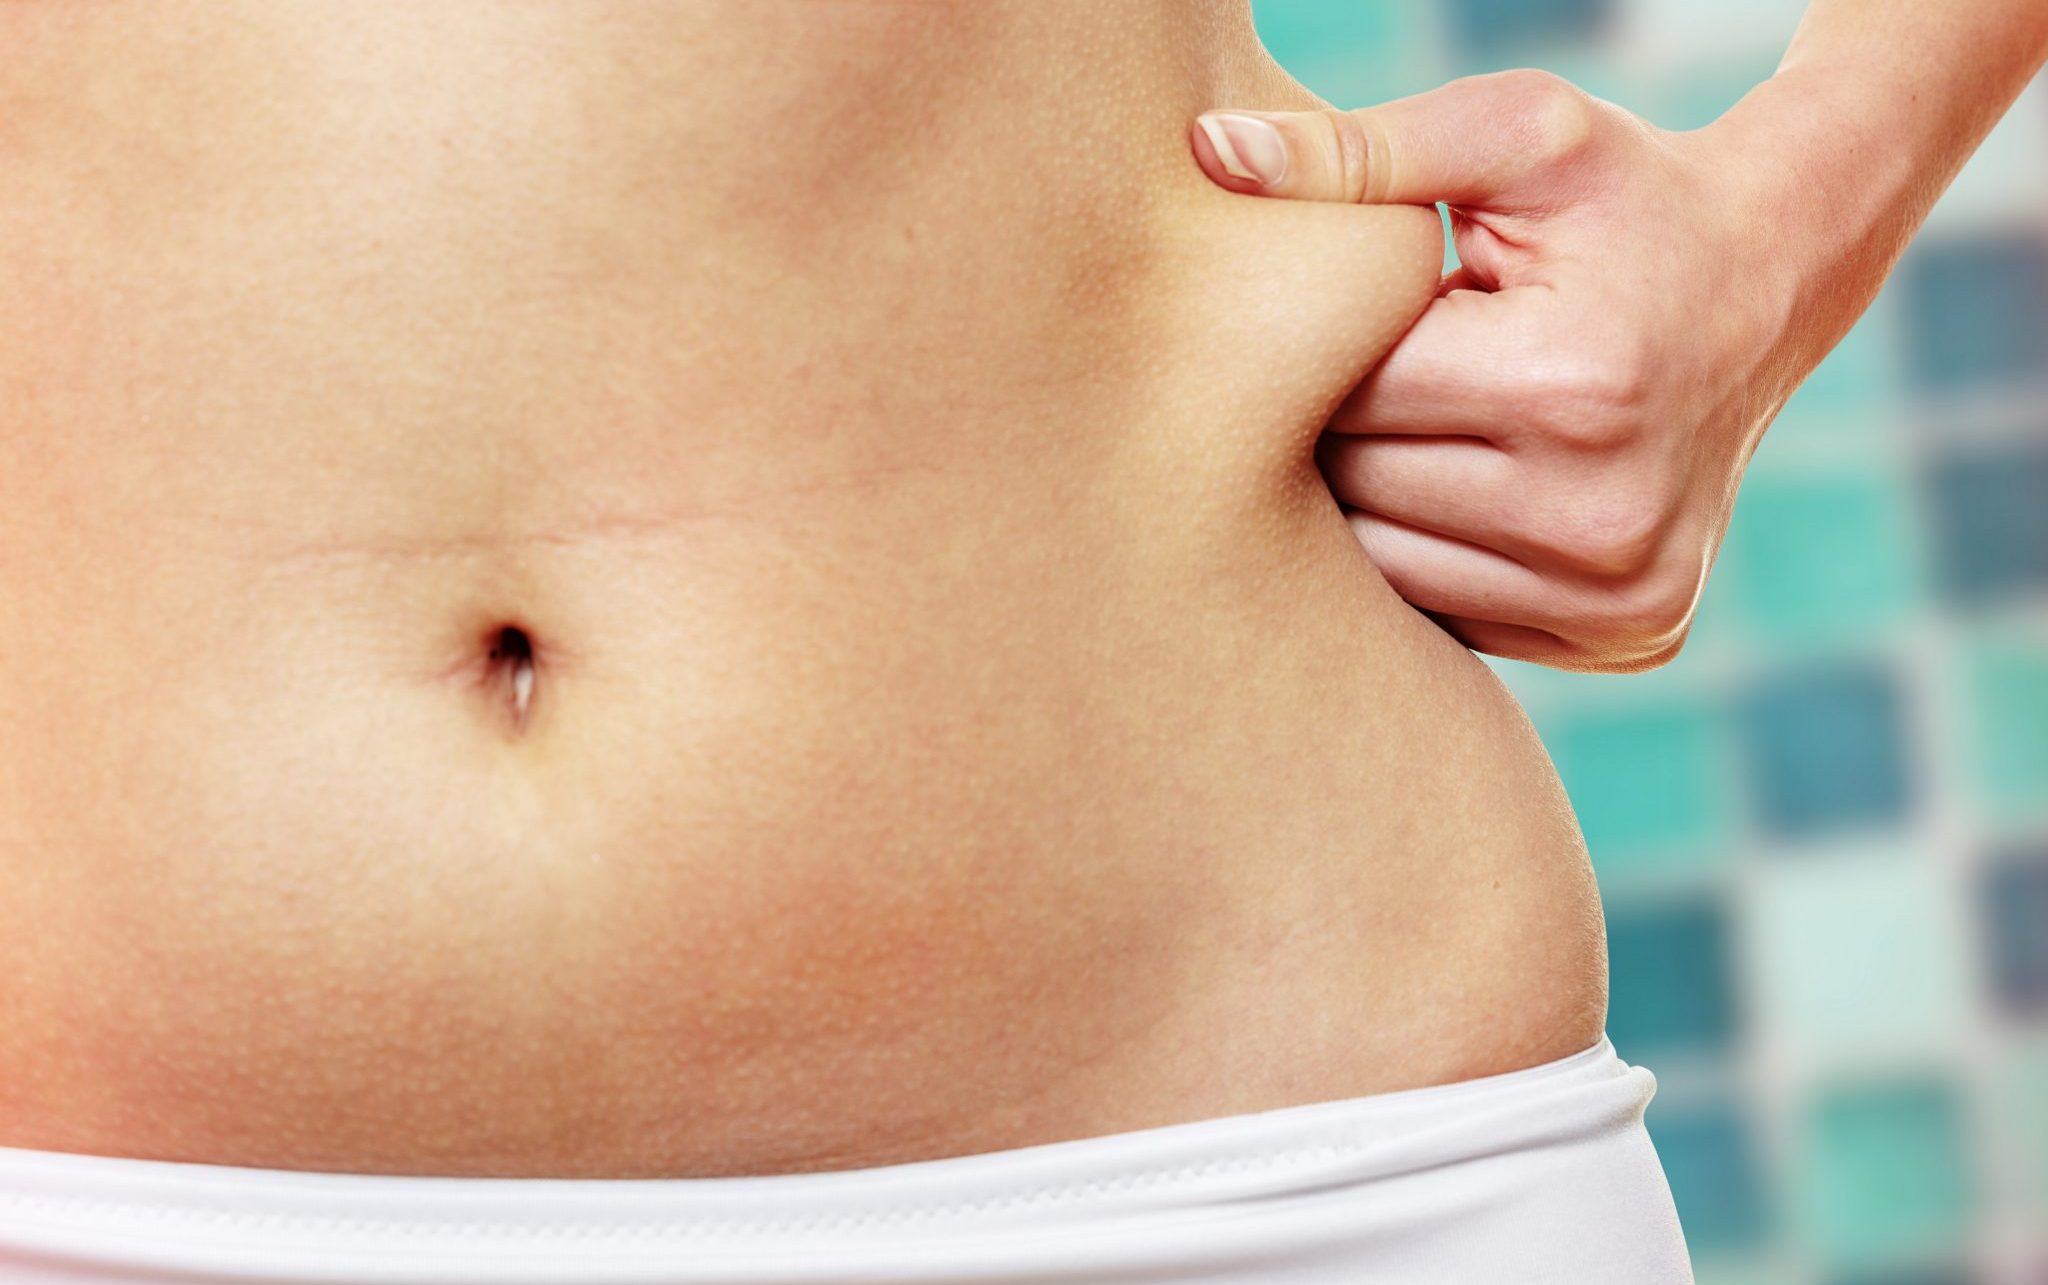 What To Do About The Loose Skin After Weight Loss